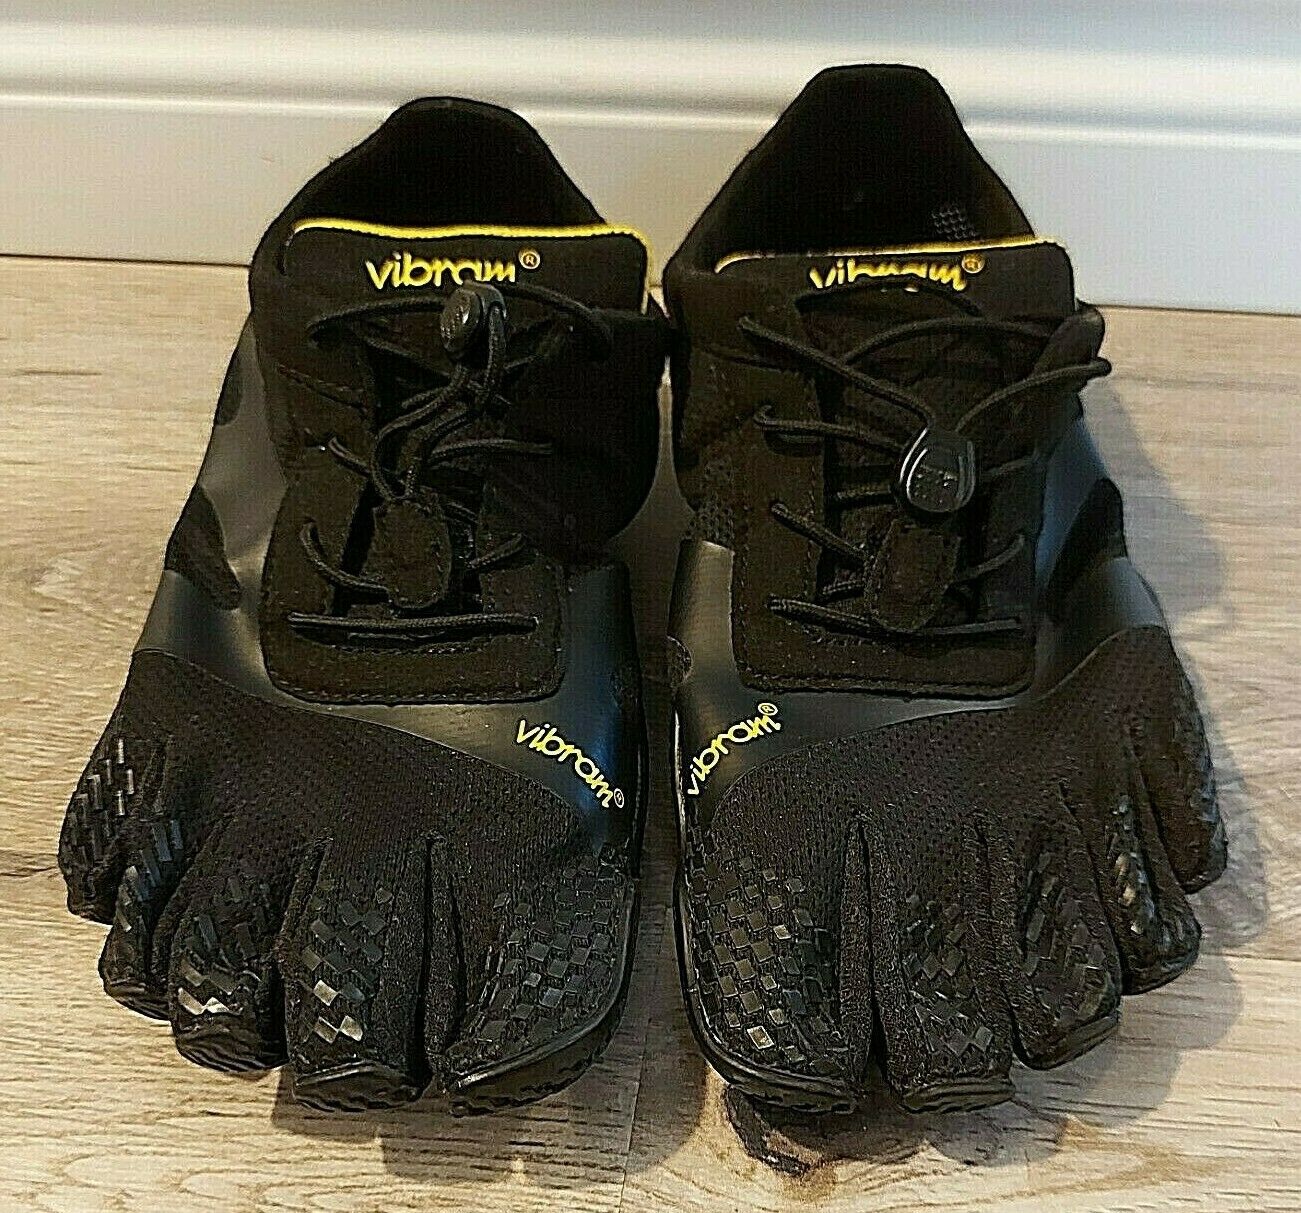 Five Finger Vibram Shoes Us 9-9.5 Great Pre-Owned Condition